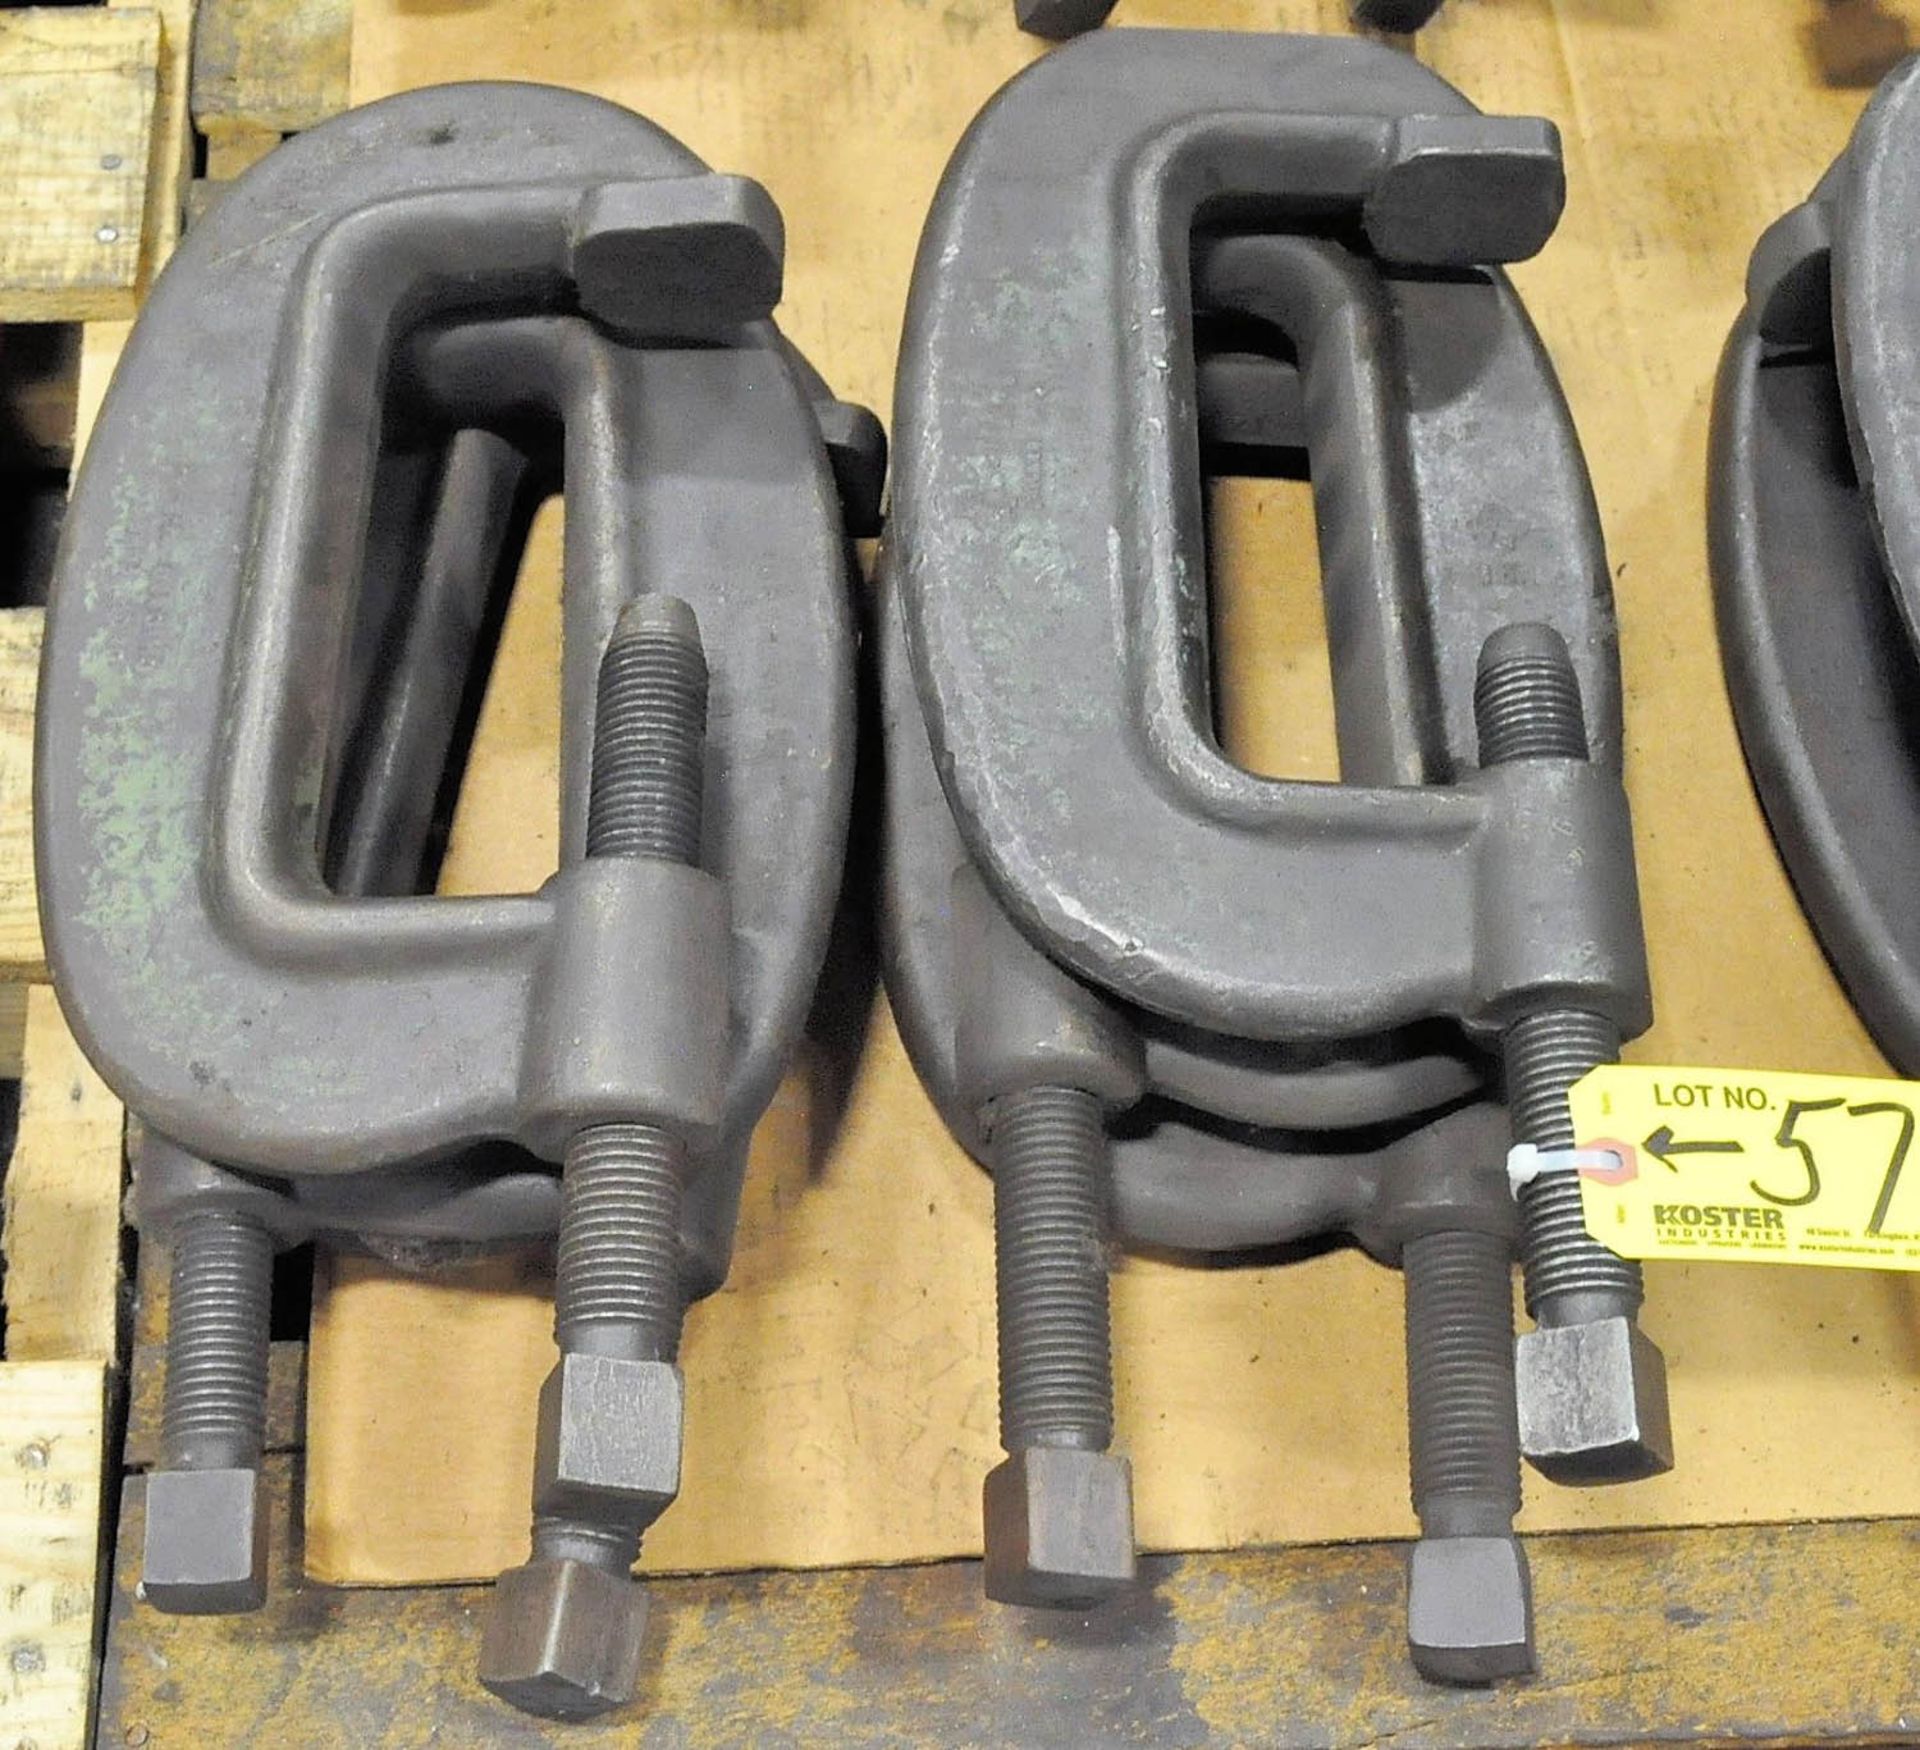 Lot of (6) 8" Die Clamps